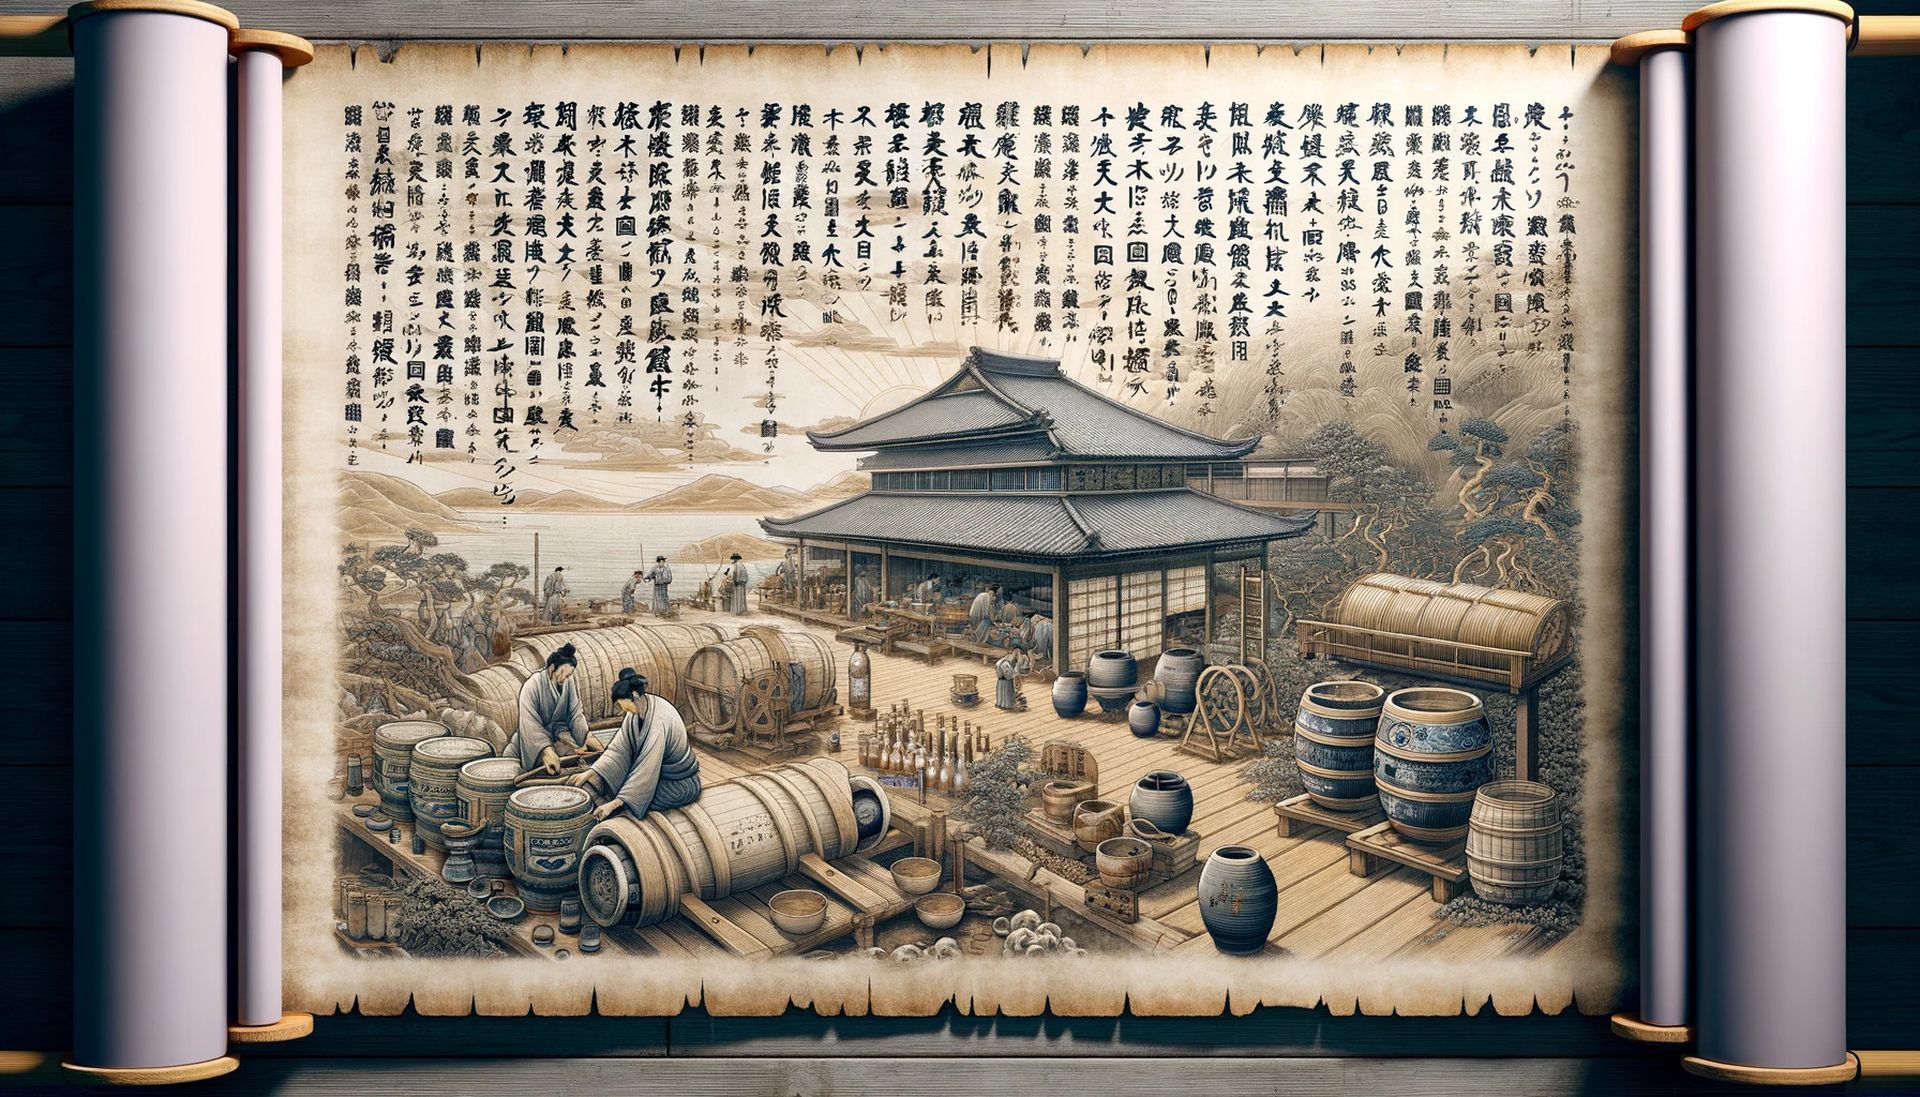 A serene and detailed image capturing the essence of Japanese rice wine, highlighting its unique brewing process and cultural significance. Image credit: Merasturda Enkeste